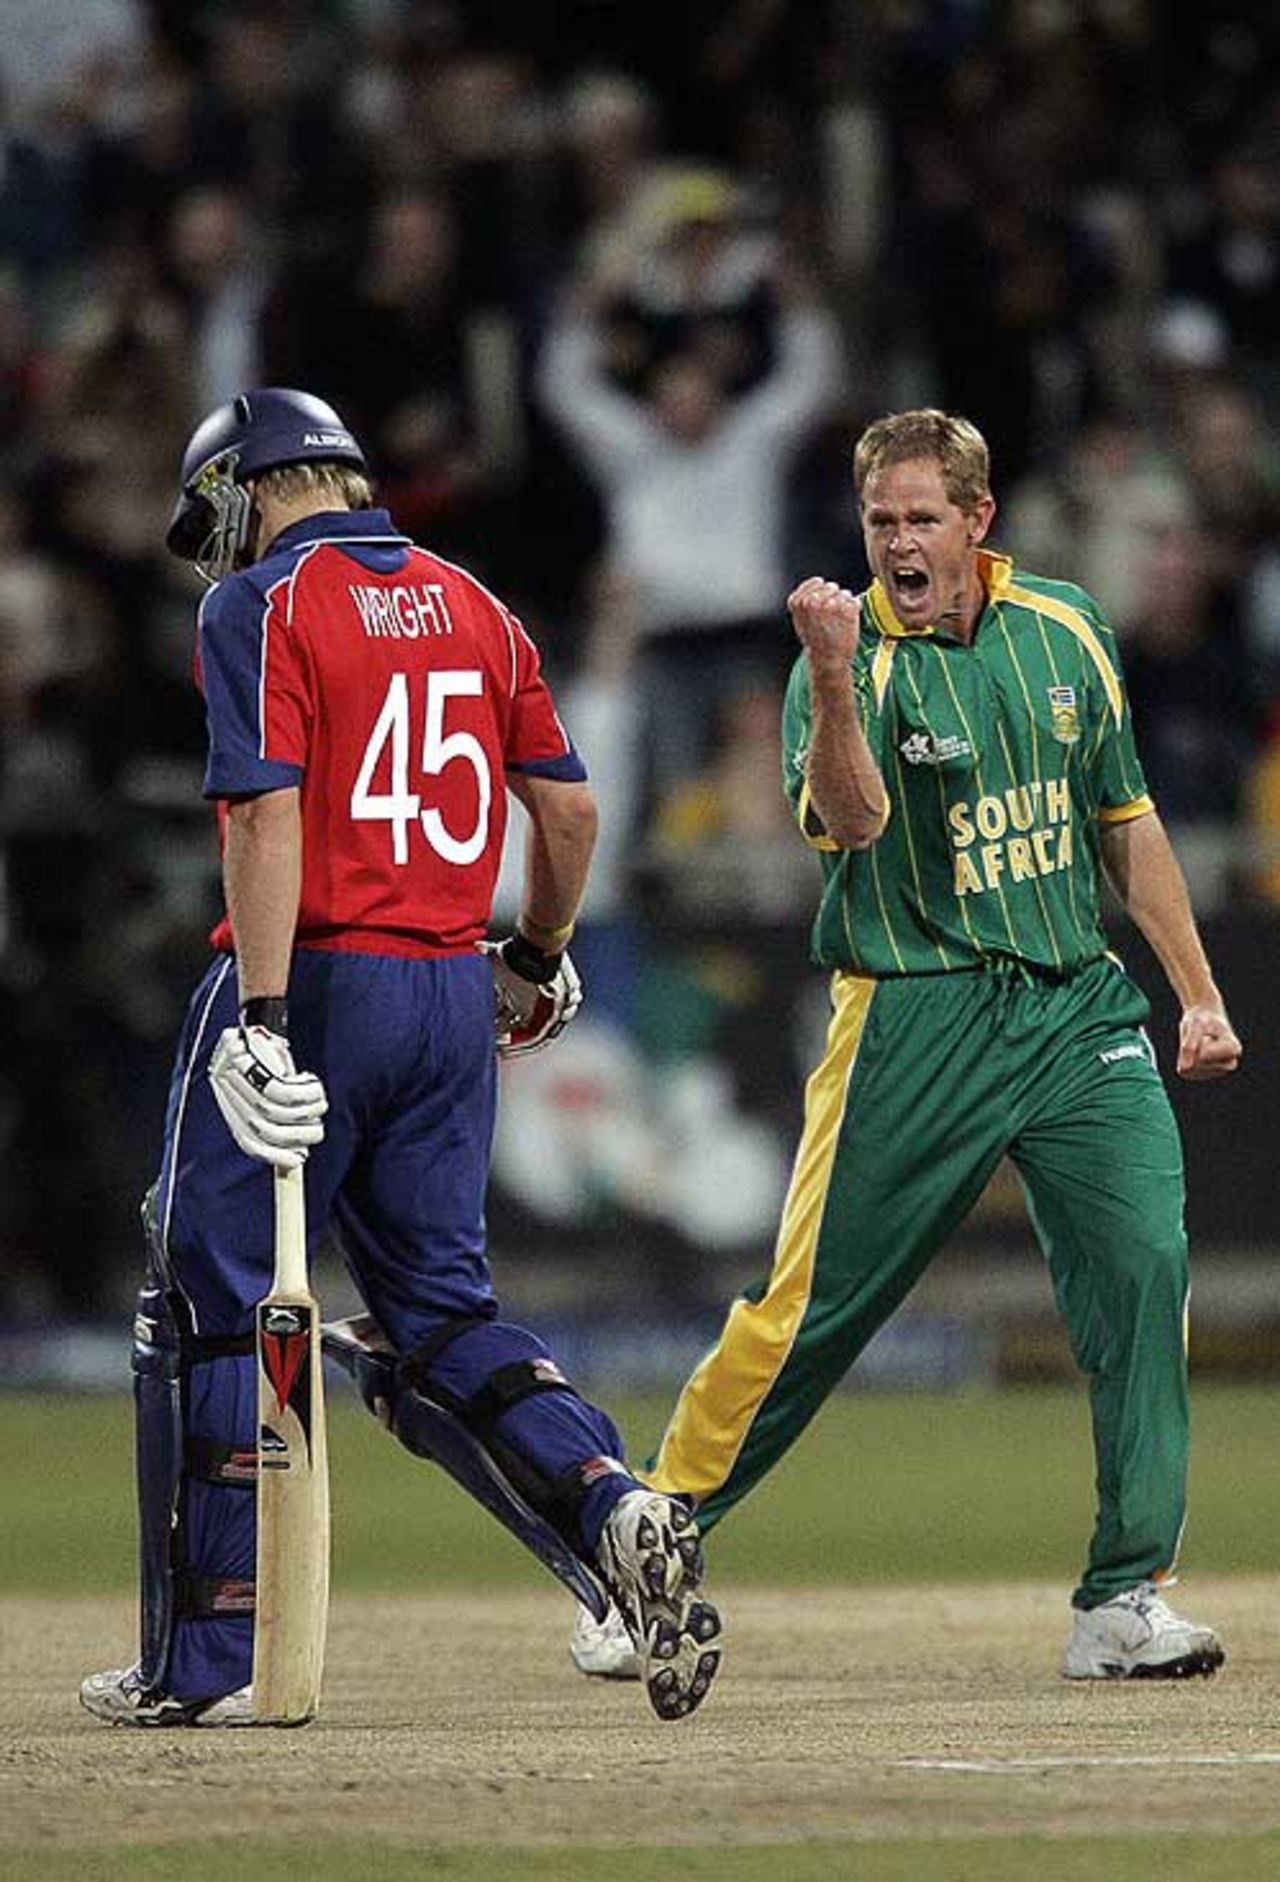 Shaun Pollock roars with delight as Luke Wright falls for a duck, Group E, ICC World Twenty20, Cape Town, September 16, 2007